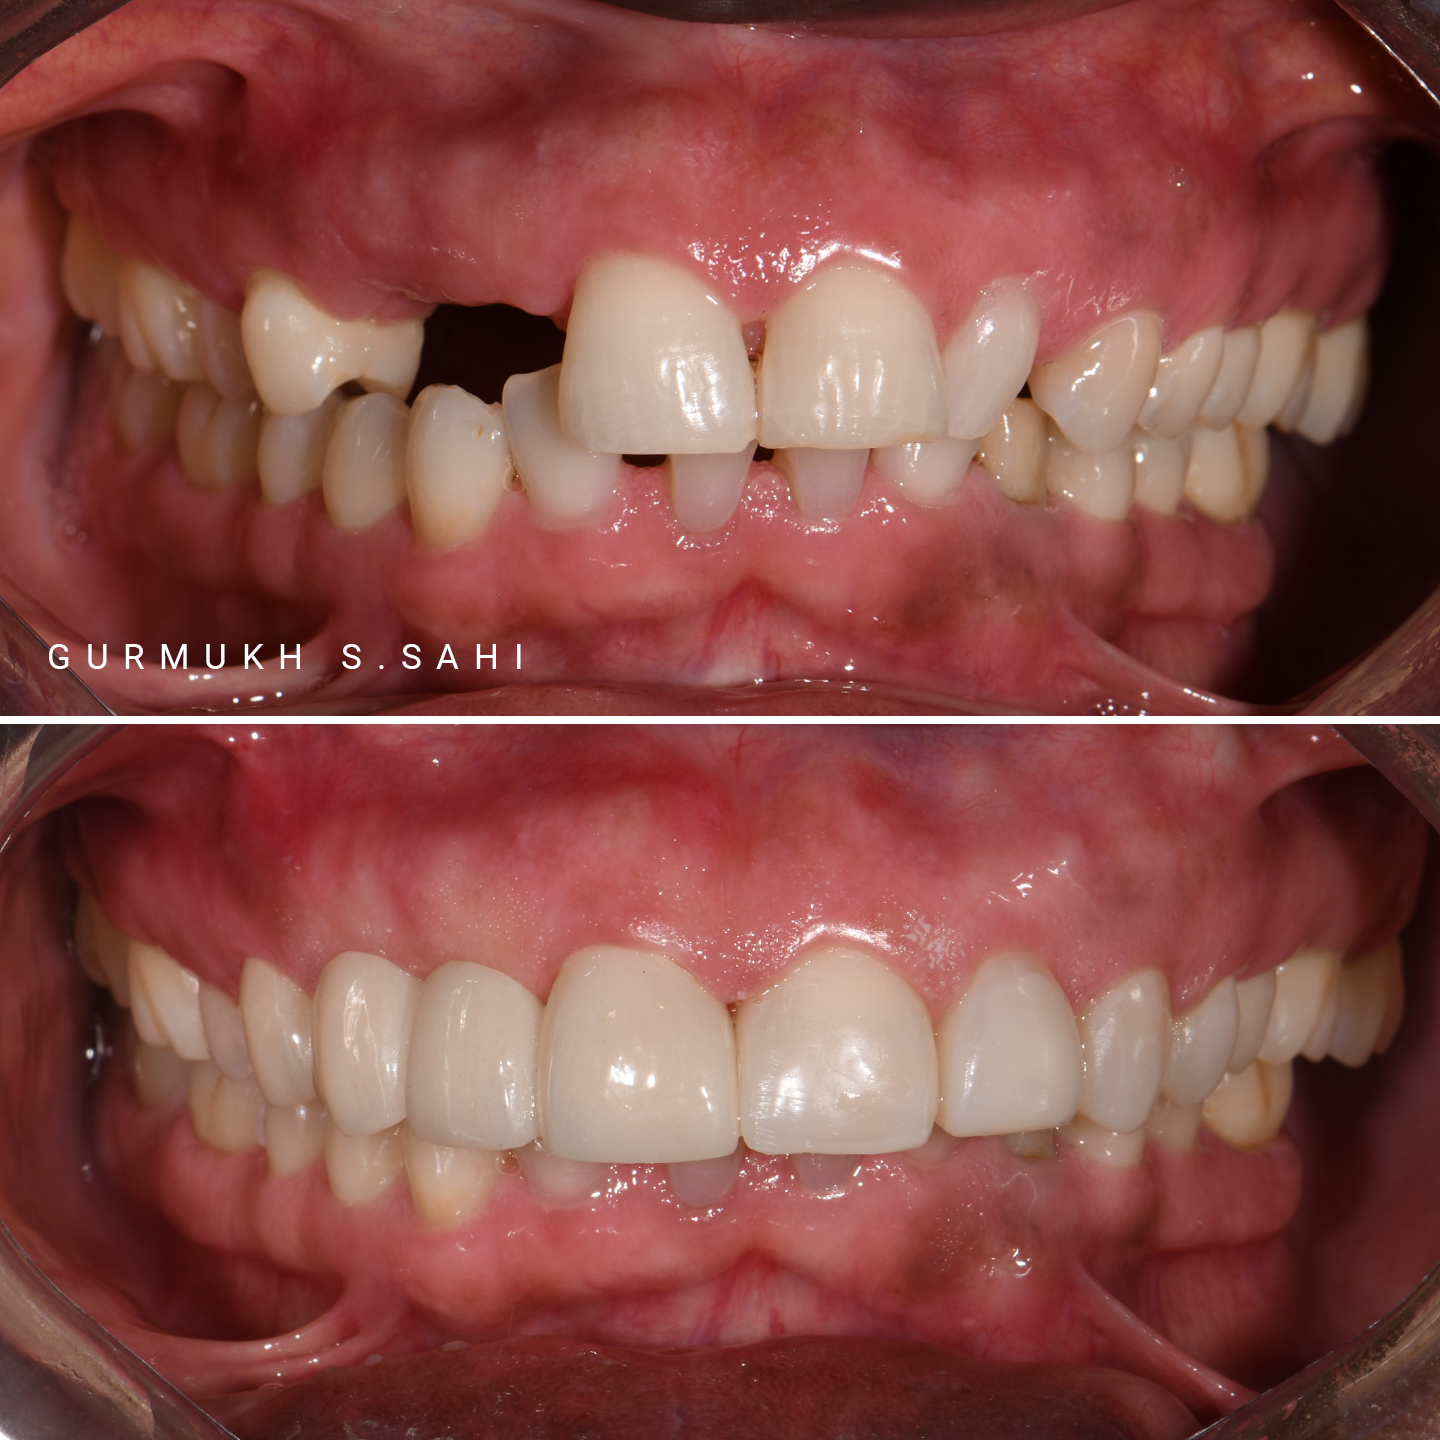 Making a patient smile with diastema closure. A minimally invasive approach  